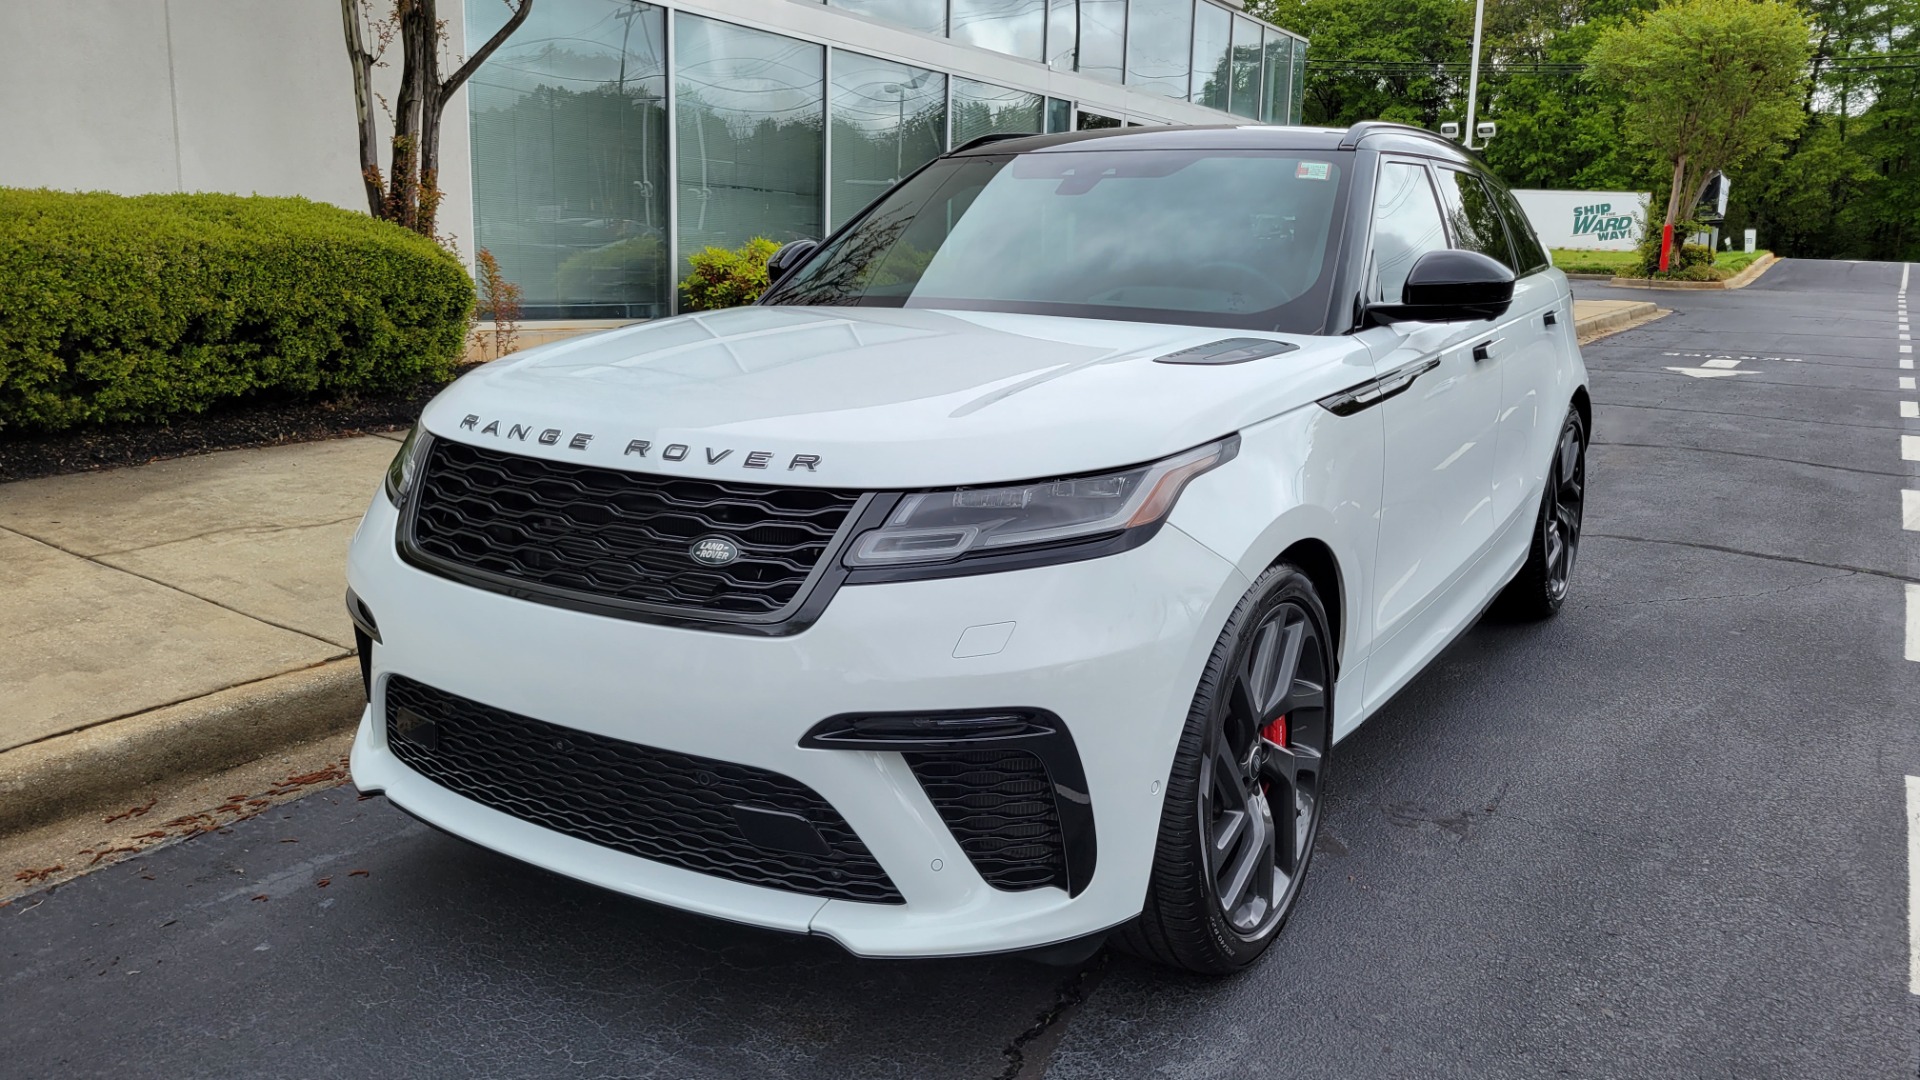 Used 2020 Land Rover Range Rover Velar SVAutobiography Dynamic Edition for sale $90,995 at Formula Imports in Charlotte NC 28227 3